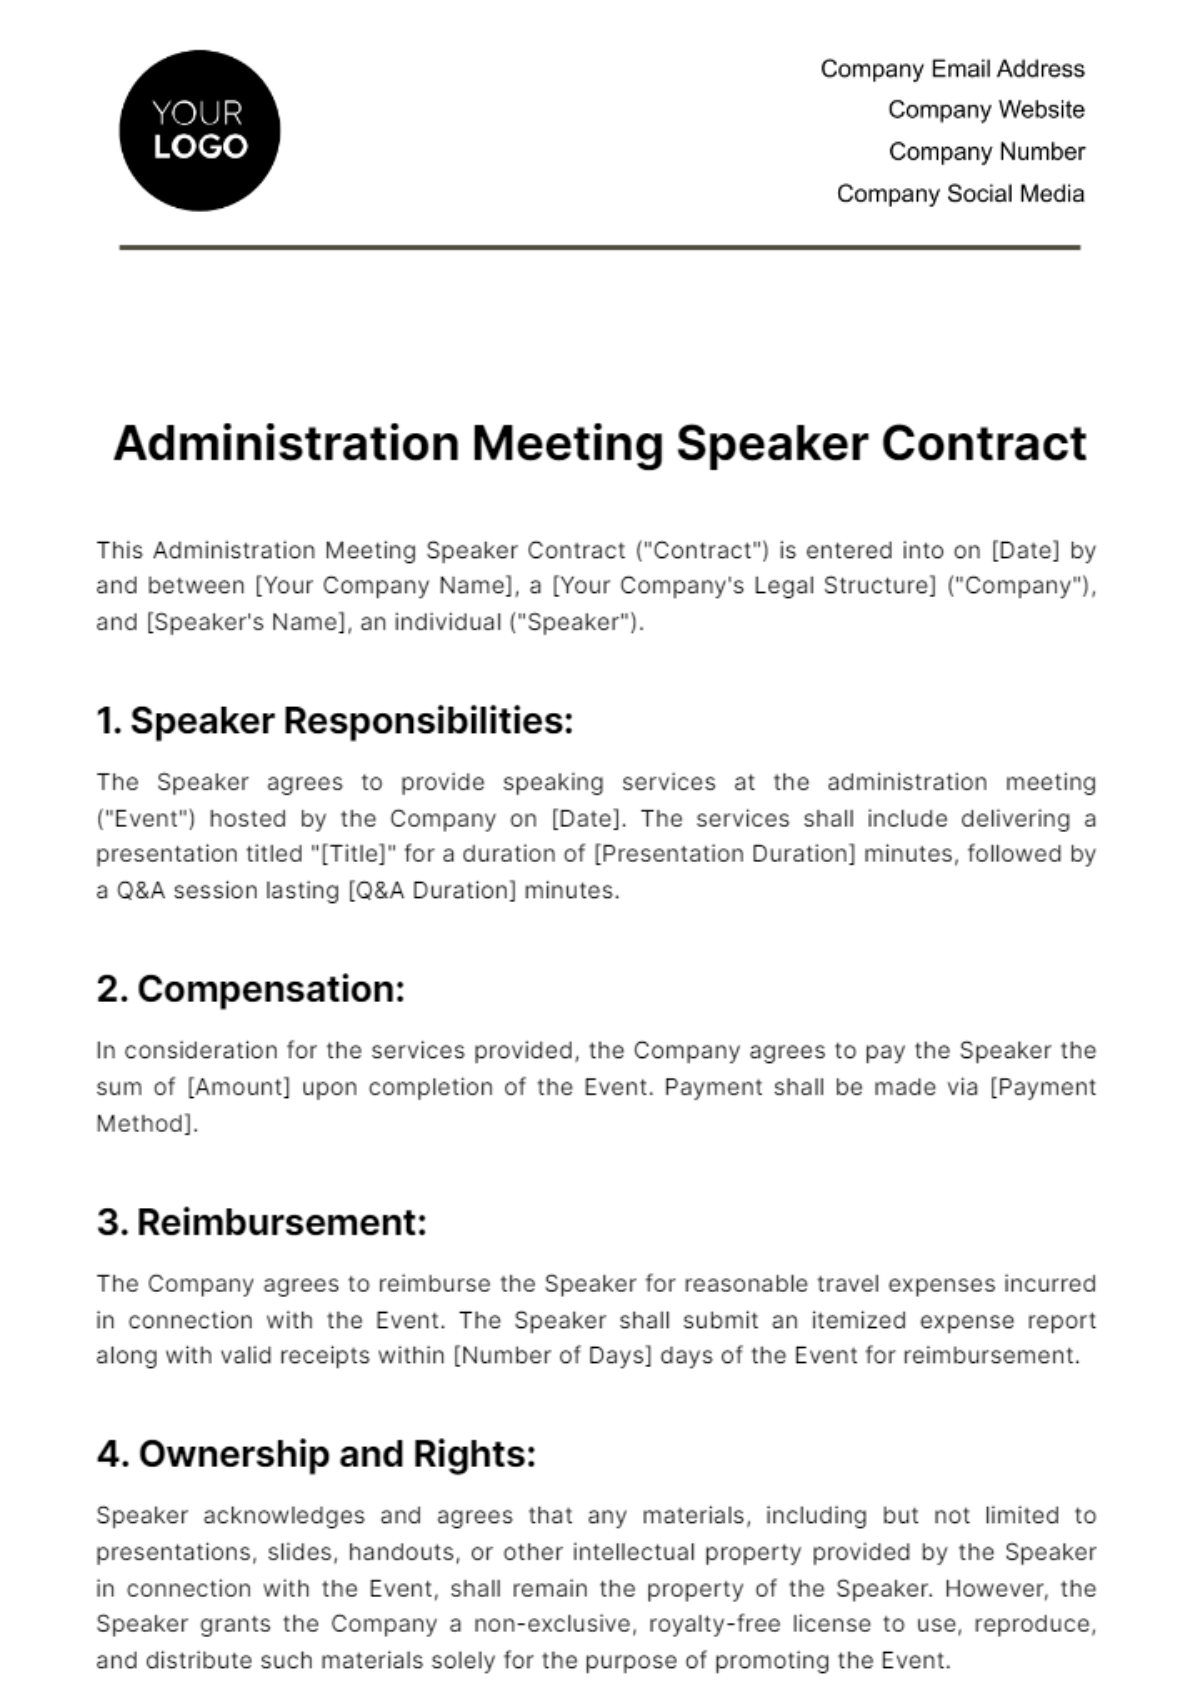 Administration Meeting Speaker Contract Template